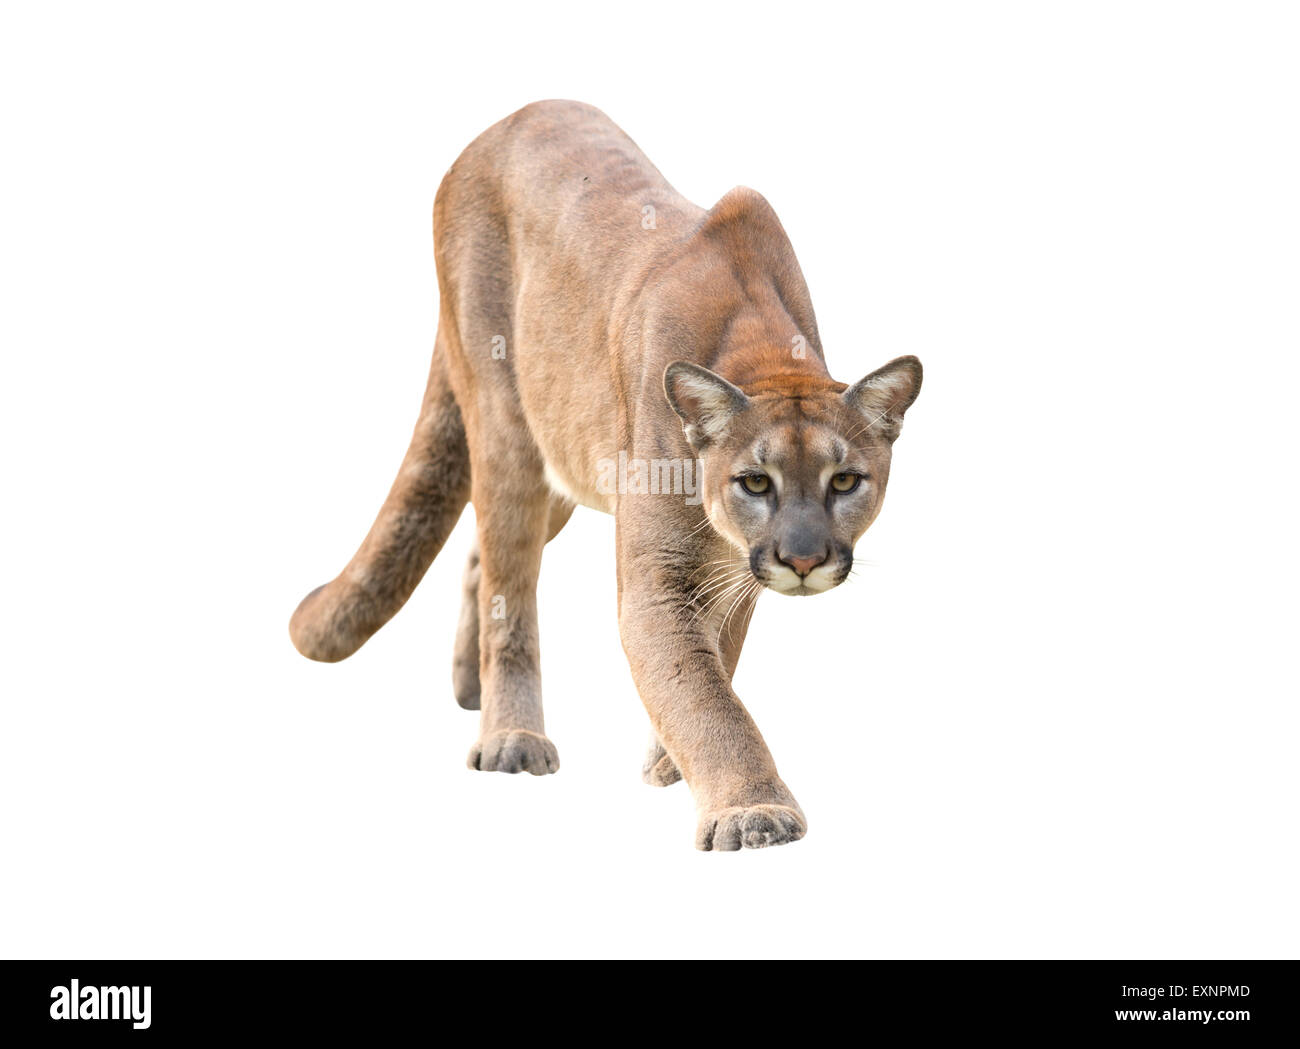 Mountain lion Cut Out Stock Images & Pictures - Alamy